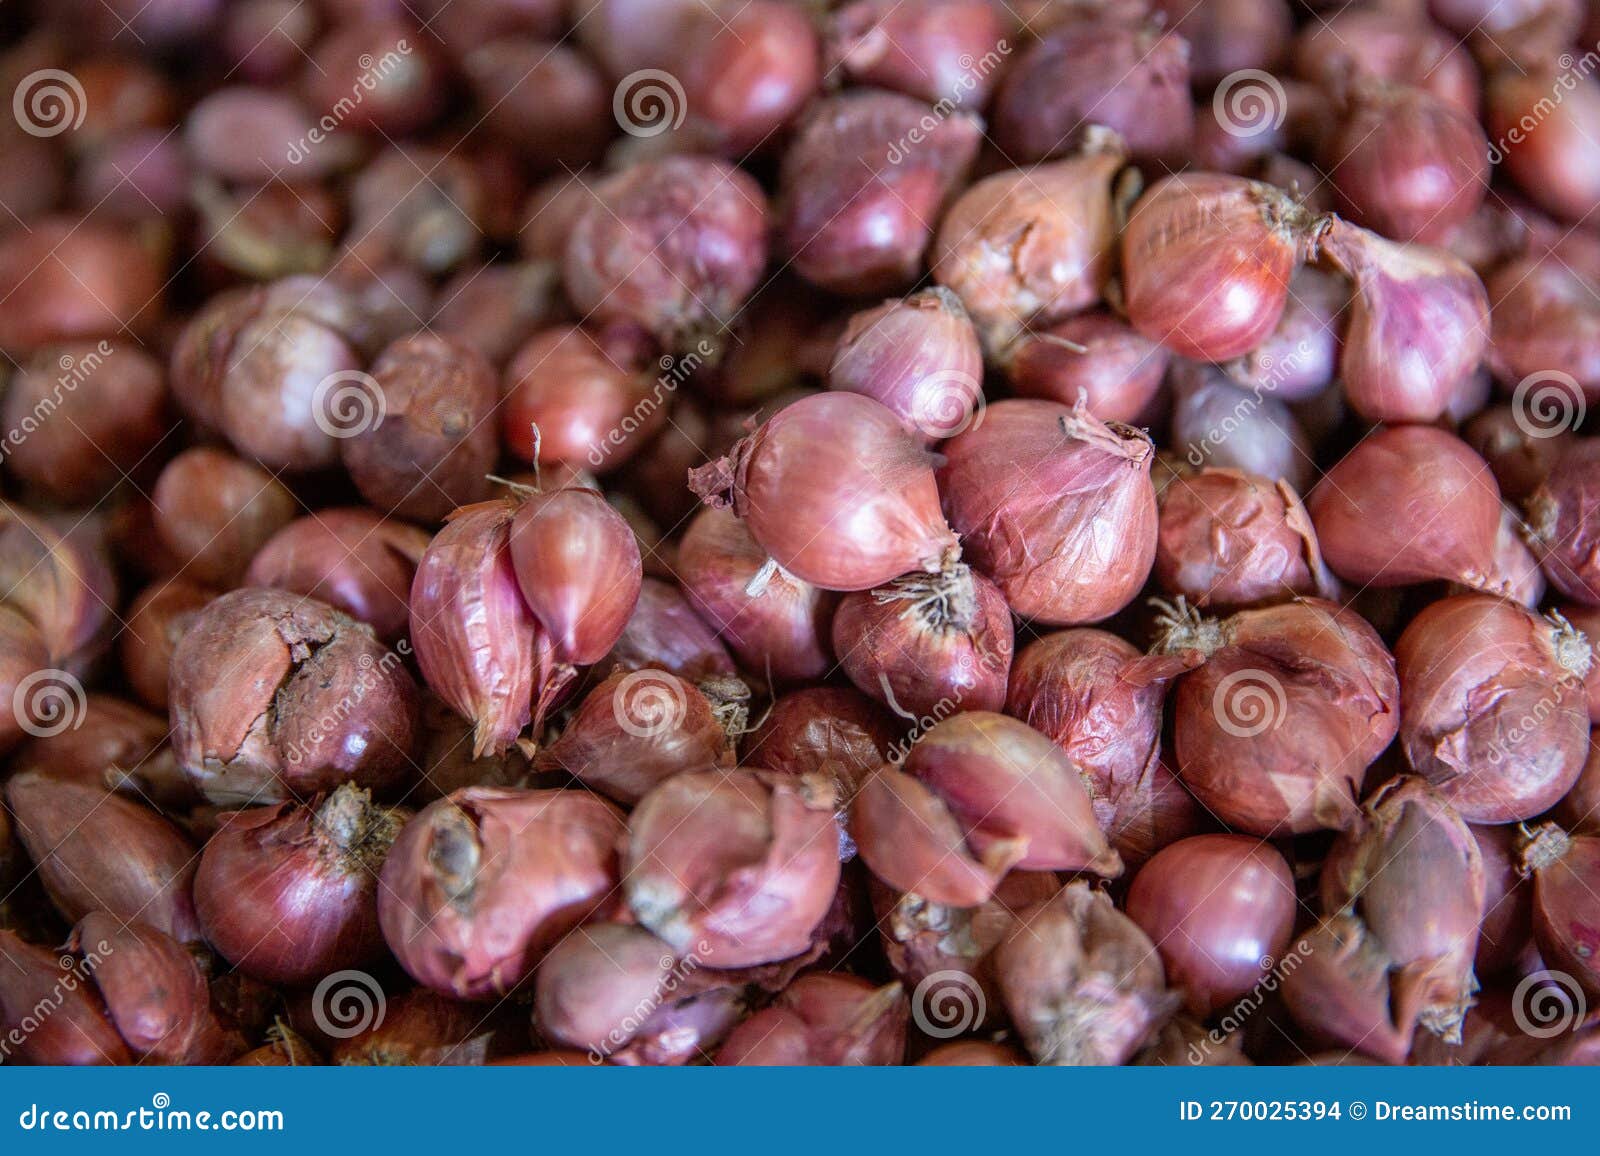 Bunch of shallots 27928331 PNG